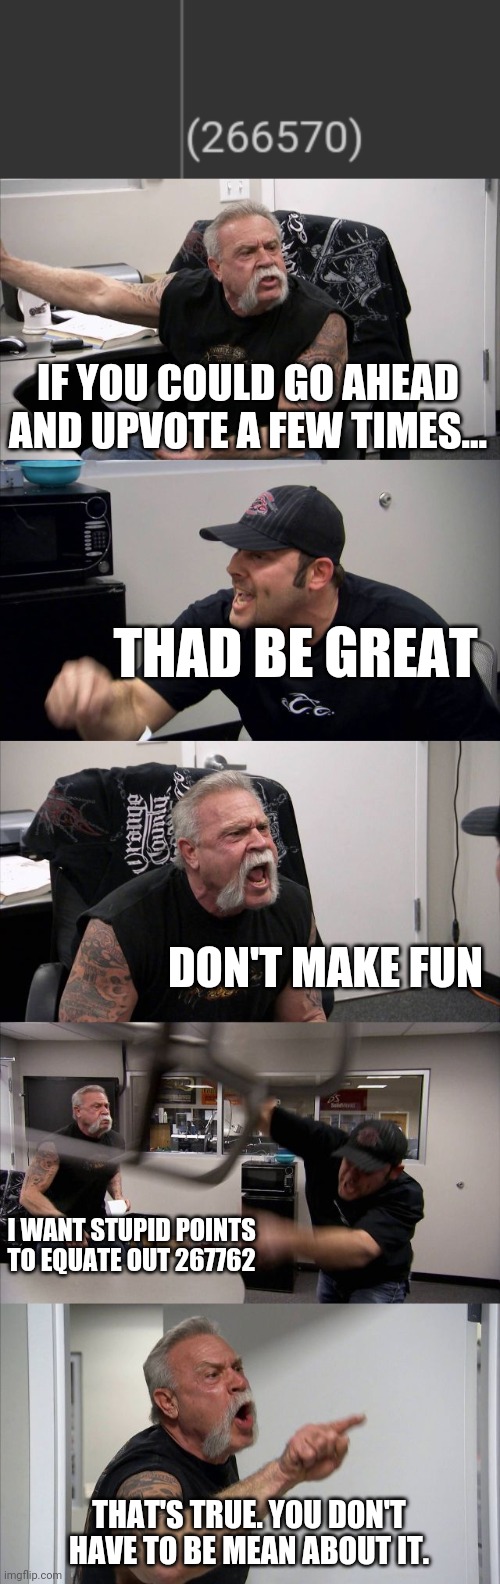 Yin Yang | IF YOU COULD GO AHEAD AND UPVOTE A FEW TIMES... THAD BE GREAT; DON'T MAKE FUN; I WANT STUPID POINTS TO EQUATE OUT 267762; THAT'S TRUE. YOU DON'T HAVE TO BE MEAN ABOUT IT. | image tagged in memes,american chopper argument | made w/ Imgflip meme maker